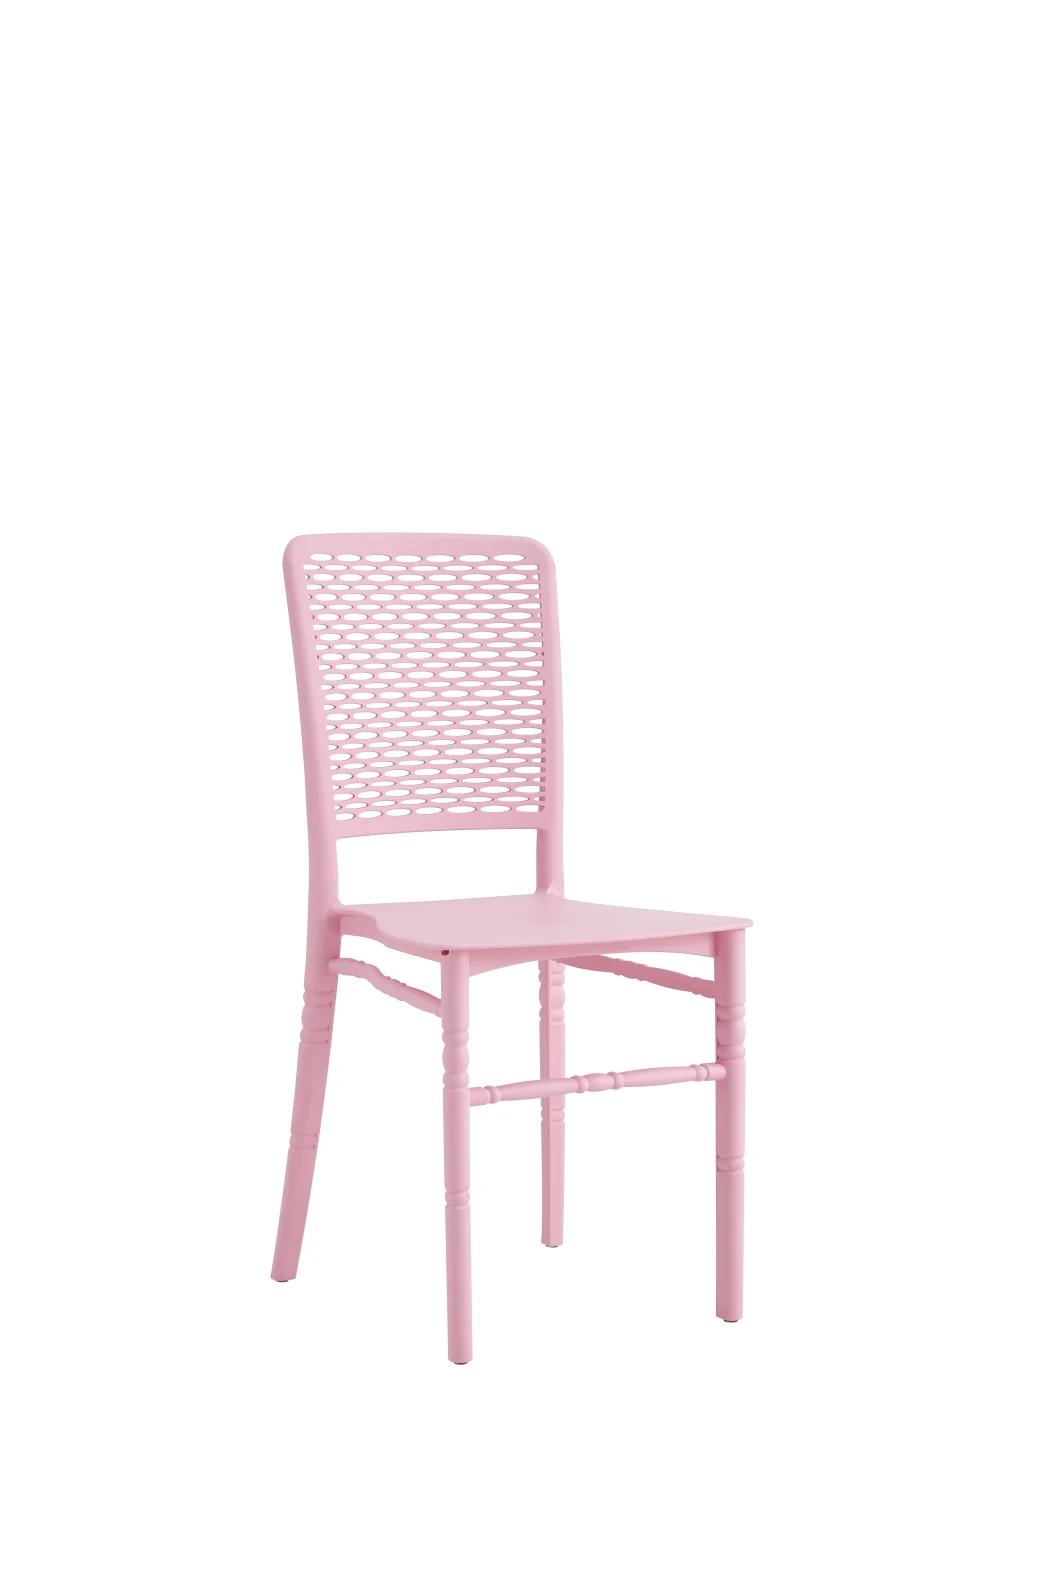 Polypropylene Water Proof Outdoor Chair Factory Hot Sale Outdoor PP Wedding Plastic Chair for Kids From China